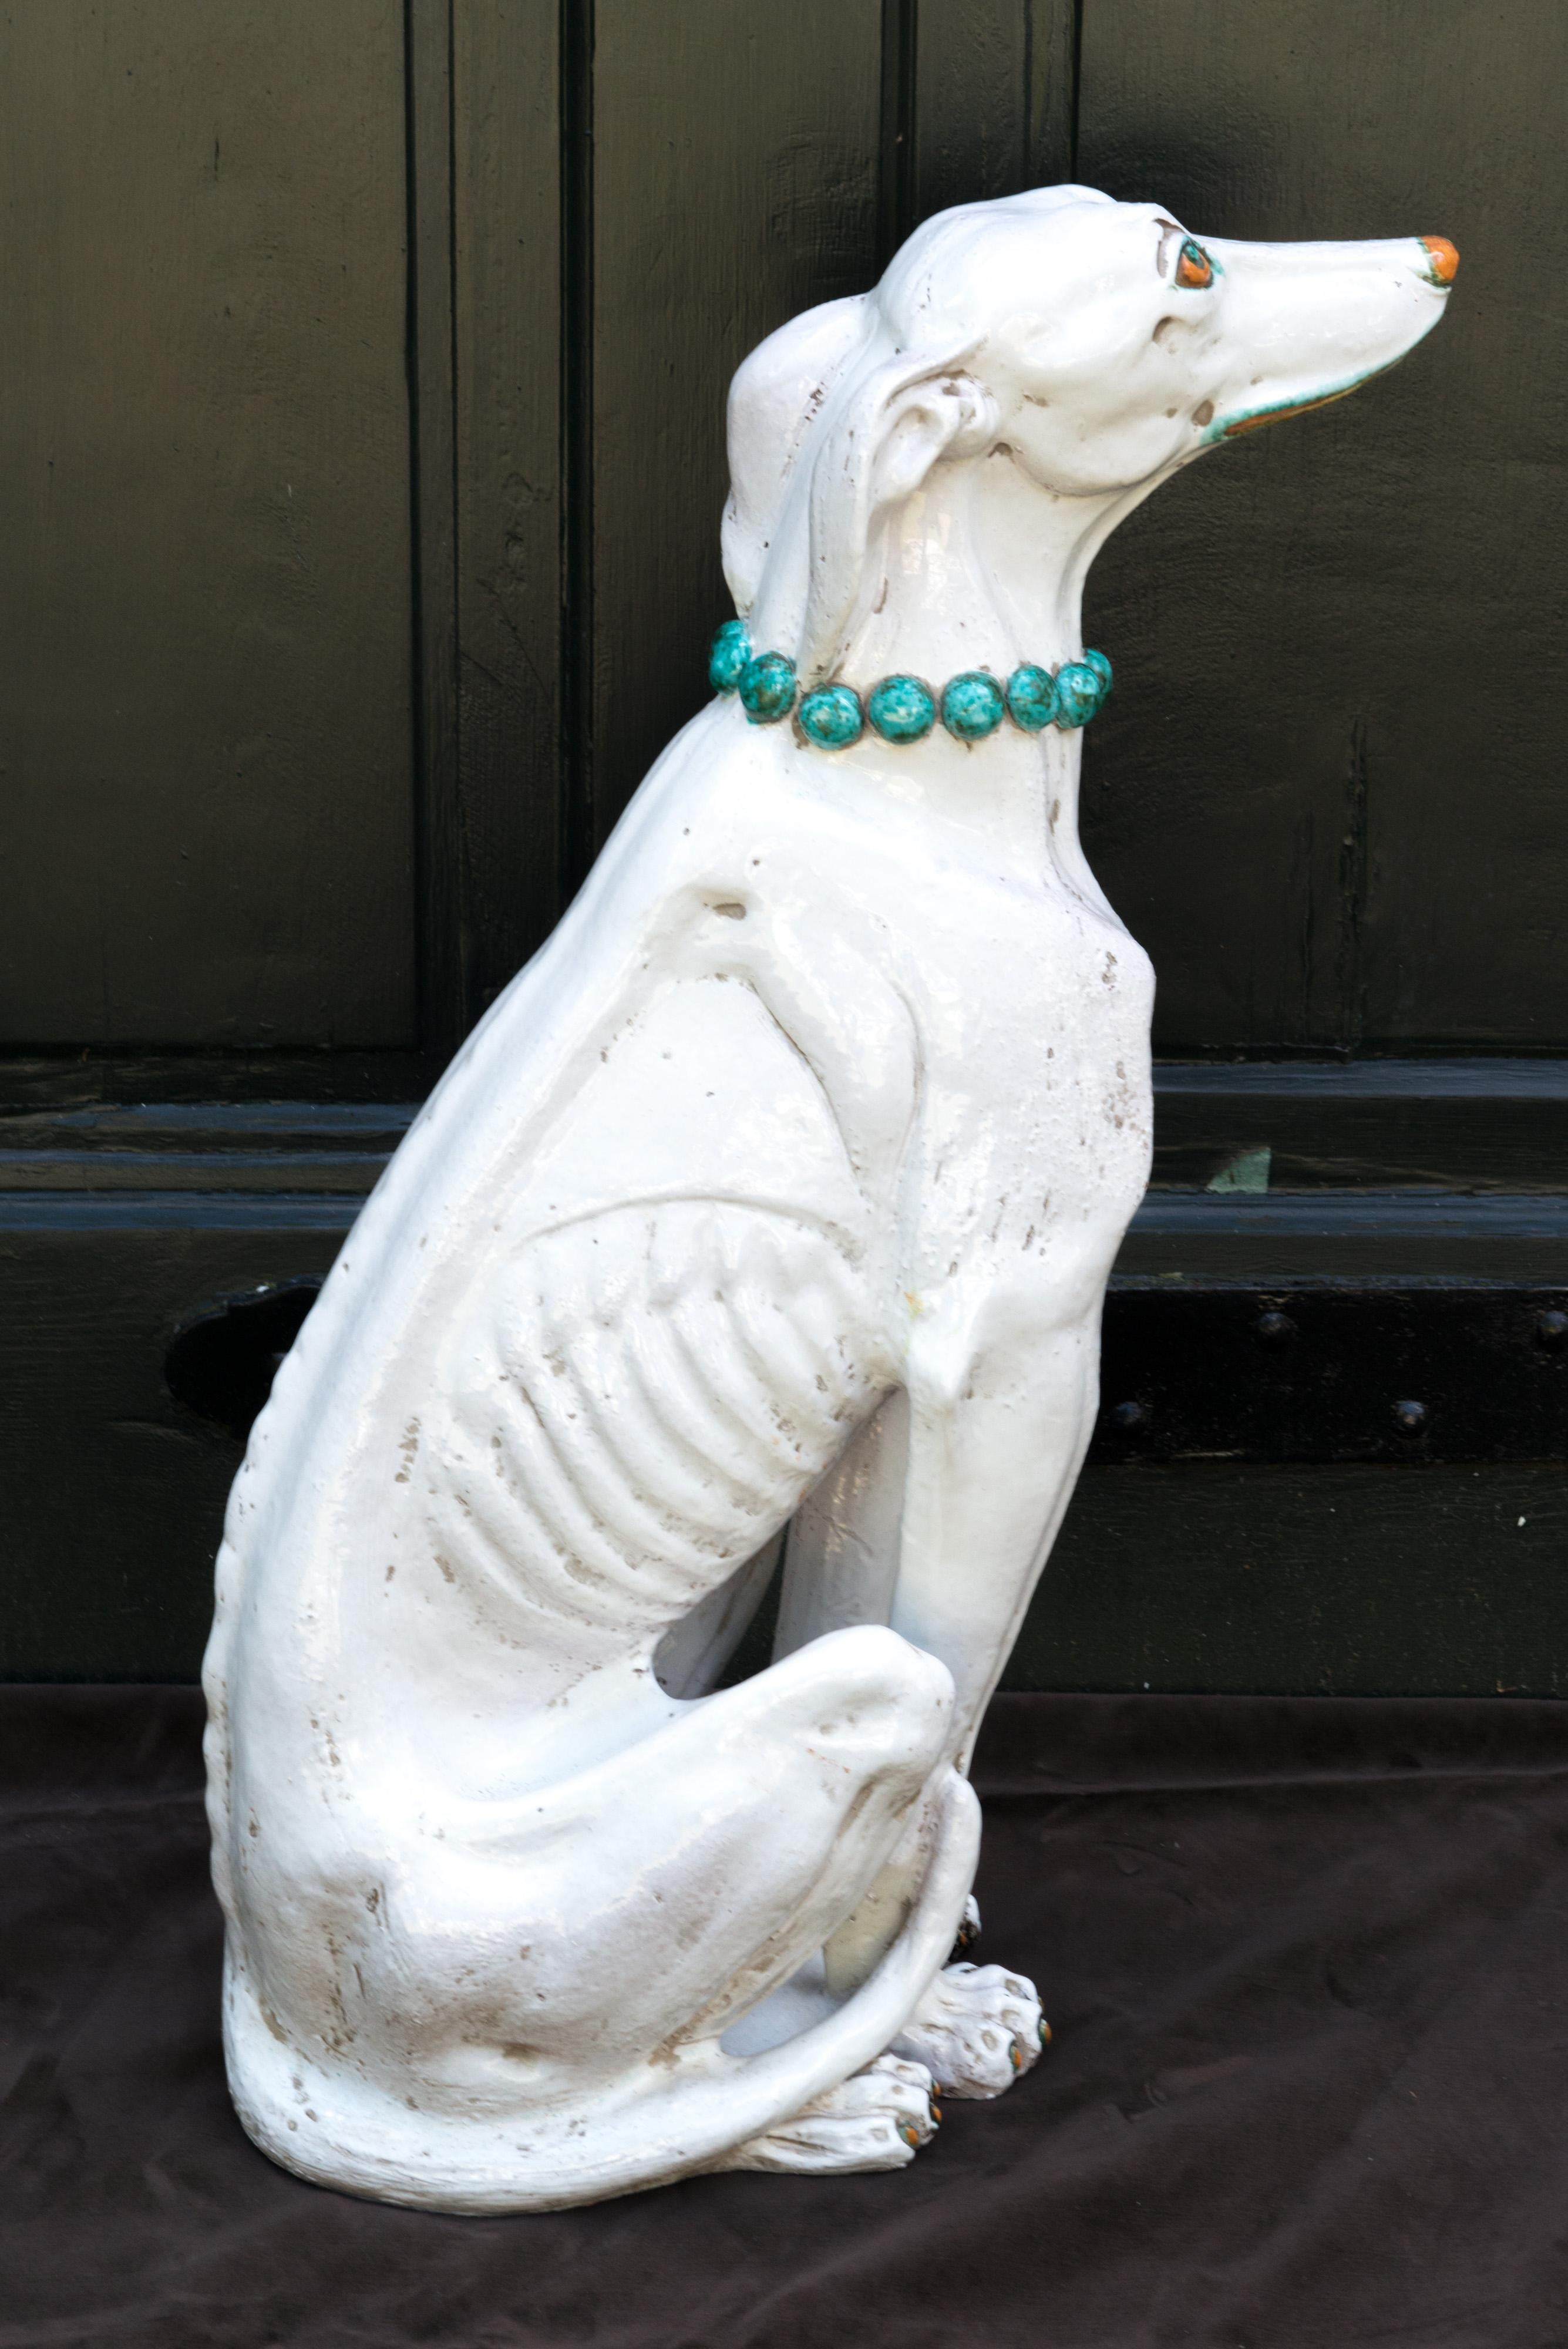 Glazed terra cotta bejeweled greyhound, probably Italian, unmarked. He is adorned with a turquoise beaded necklace, turquoise eyeliner and lipliner.
Handsome dog!